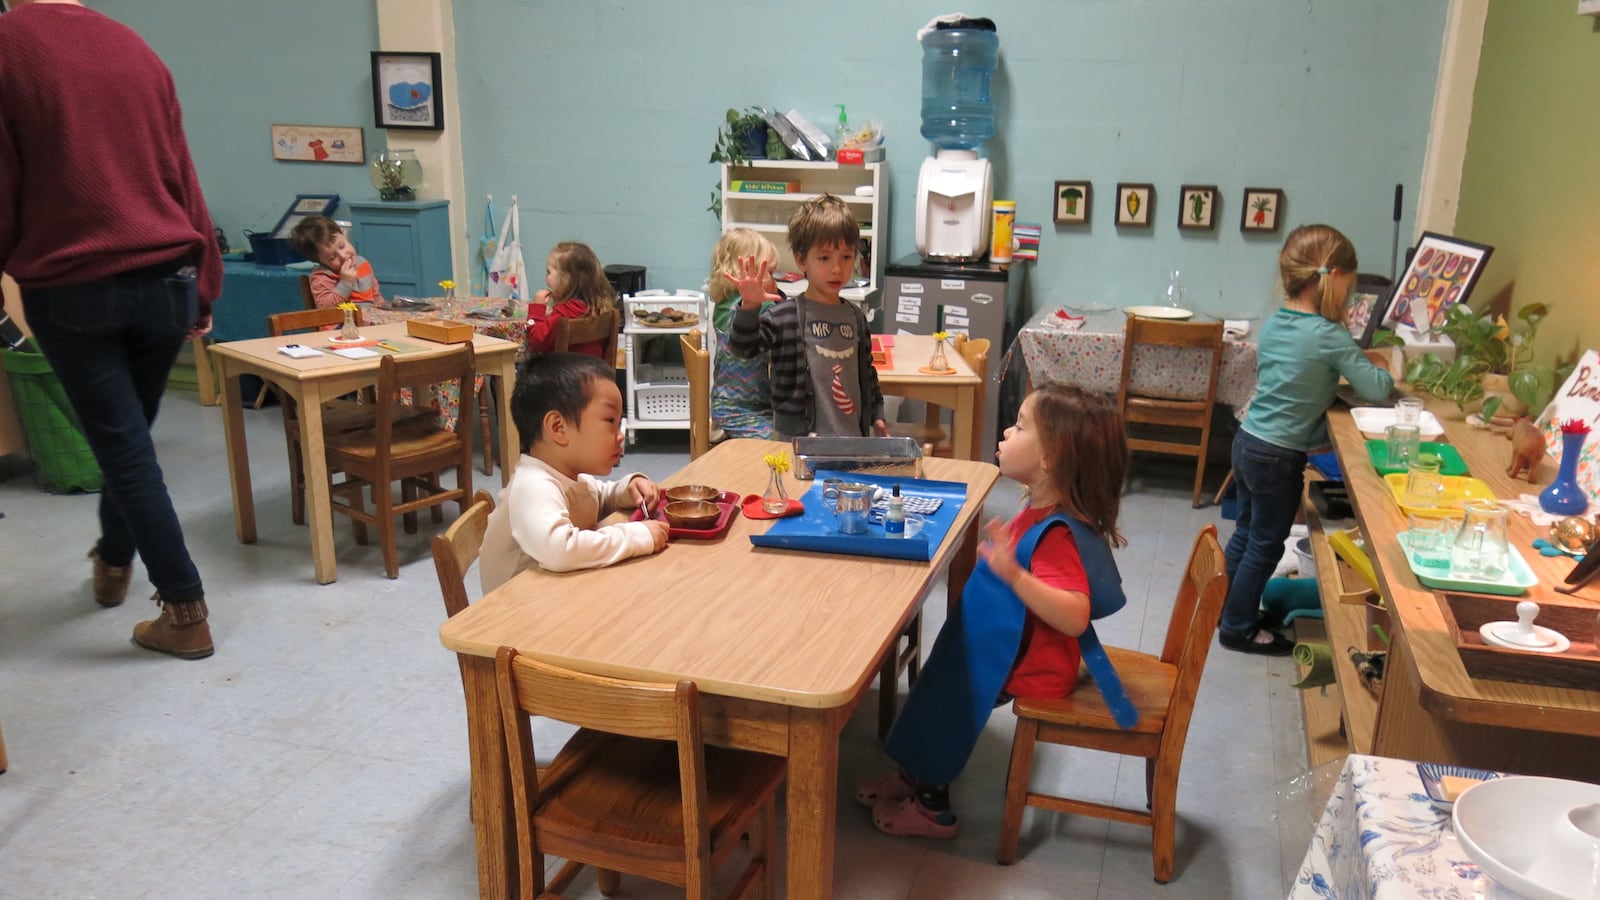 Students at Evergreen Montessori School work on a lesson together.